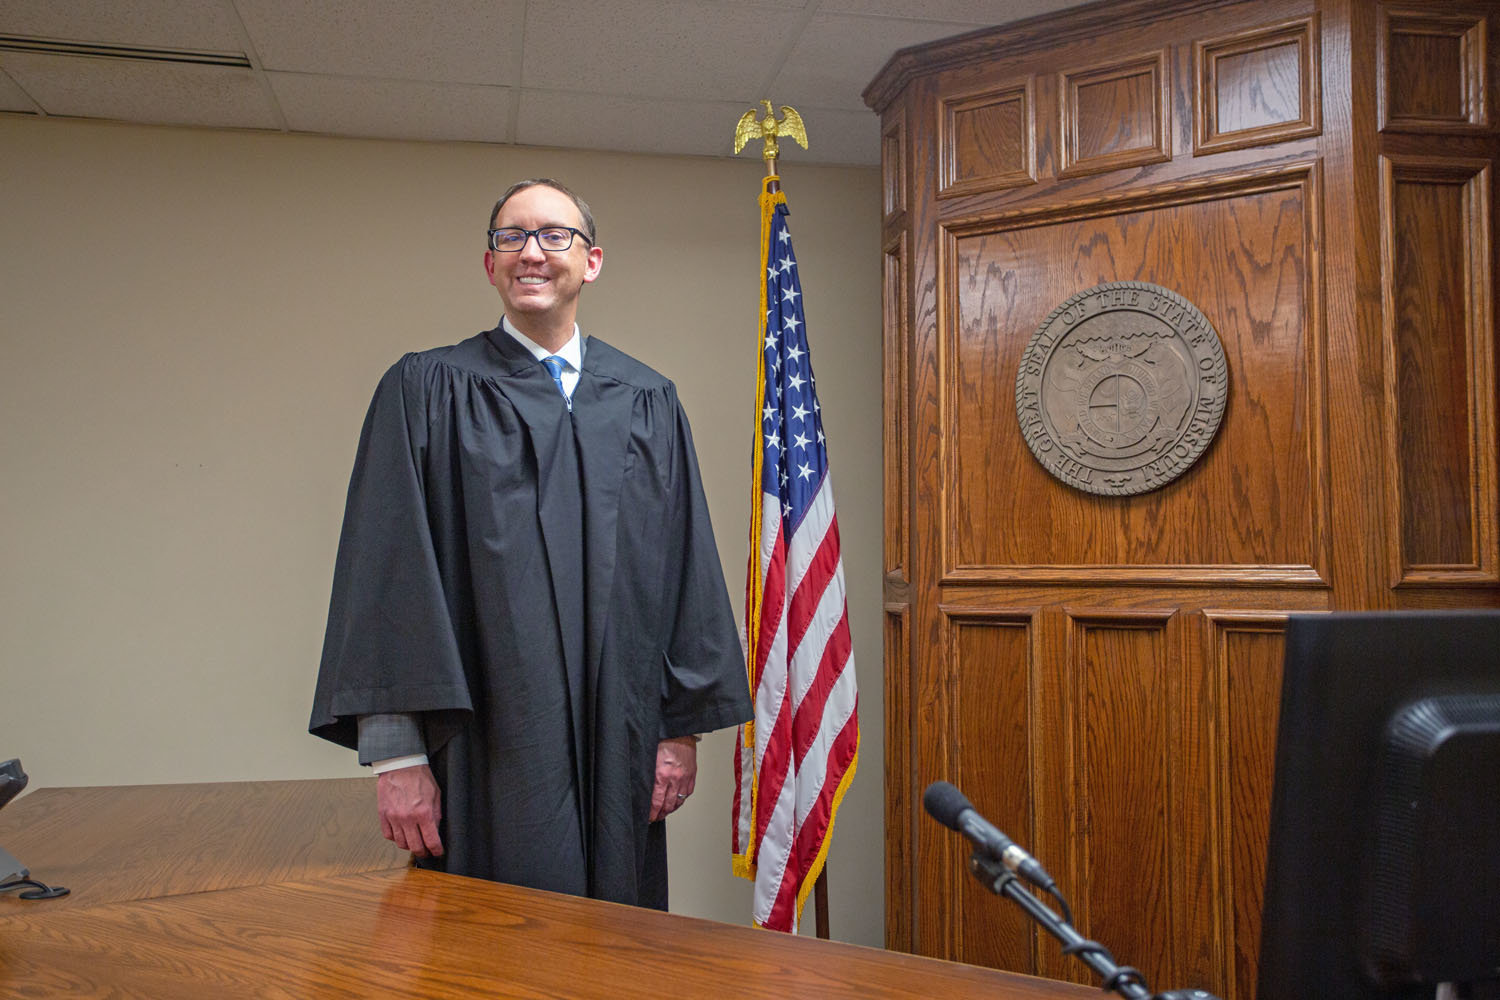 T. Todd Myers is selected as a circuit judge for the 31st Judicial Circuit.